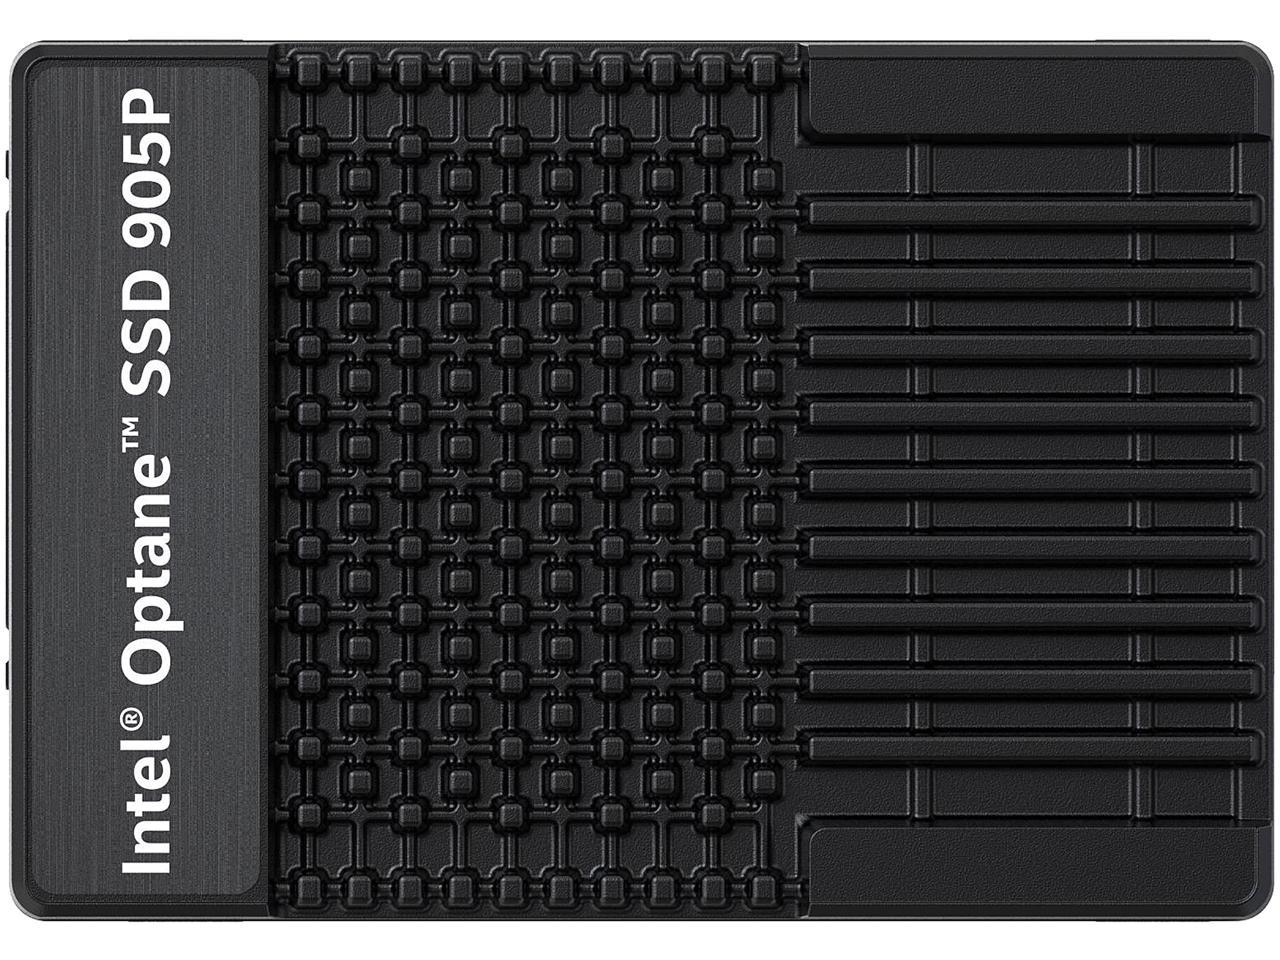 1.5TB Intel Optane 905P U.2 PCIe 3.0 x4 3D XPoint Solid State Drive (2.5" x 15mm) $400 + Free Shipping